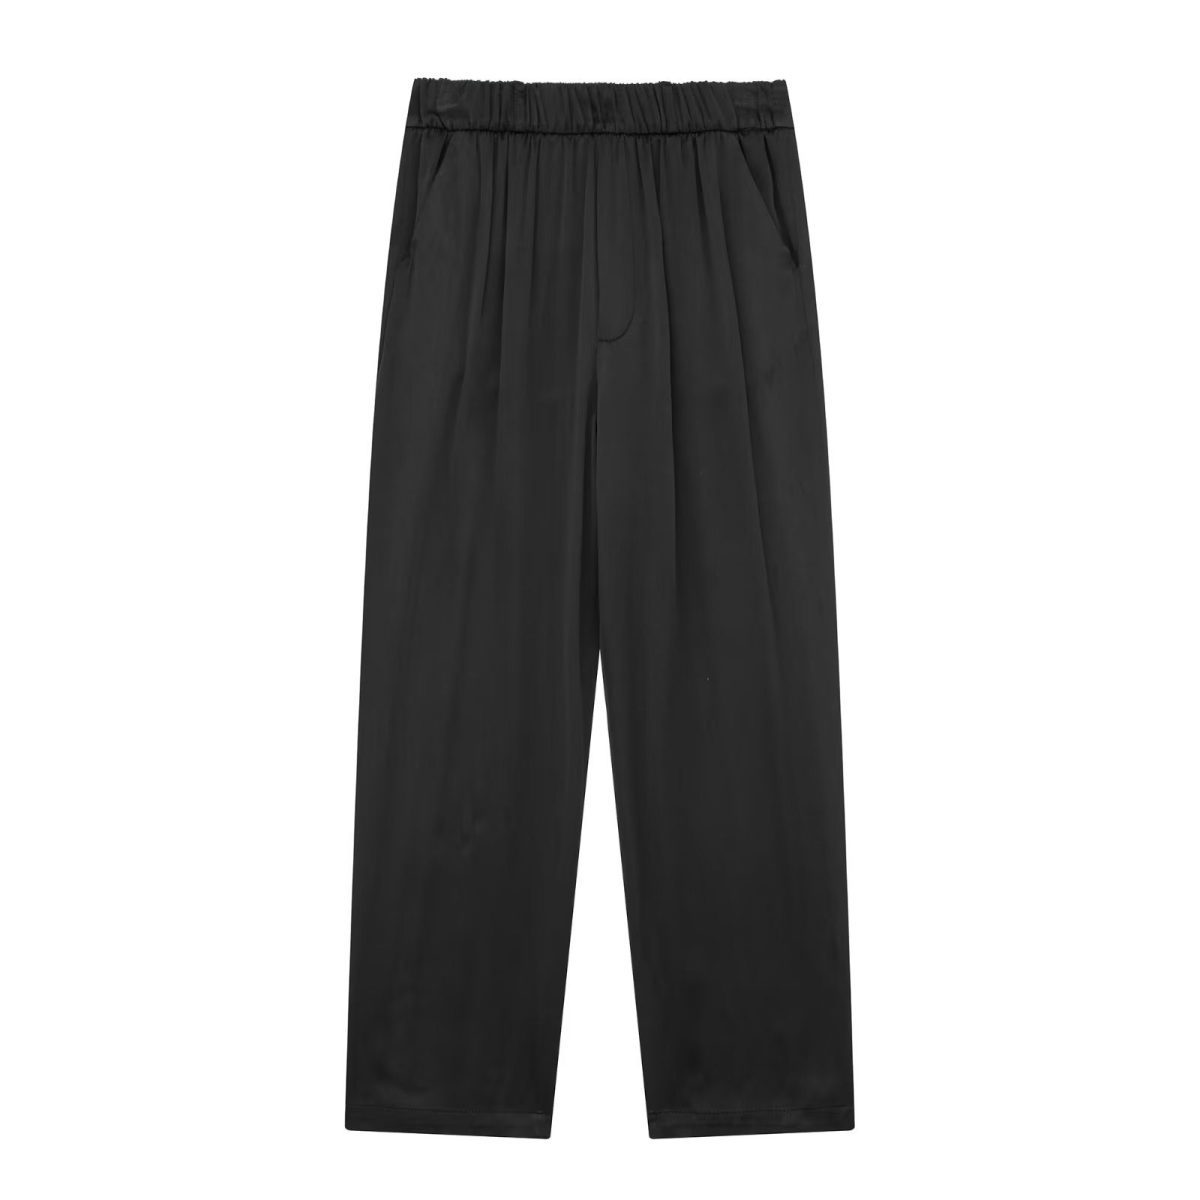 Satin Texture Loose Shacket Trousers in Pants